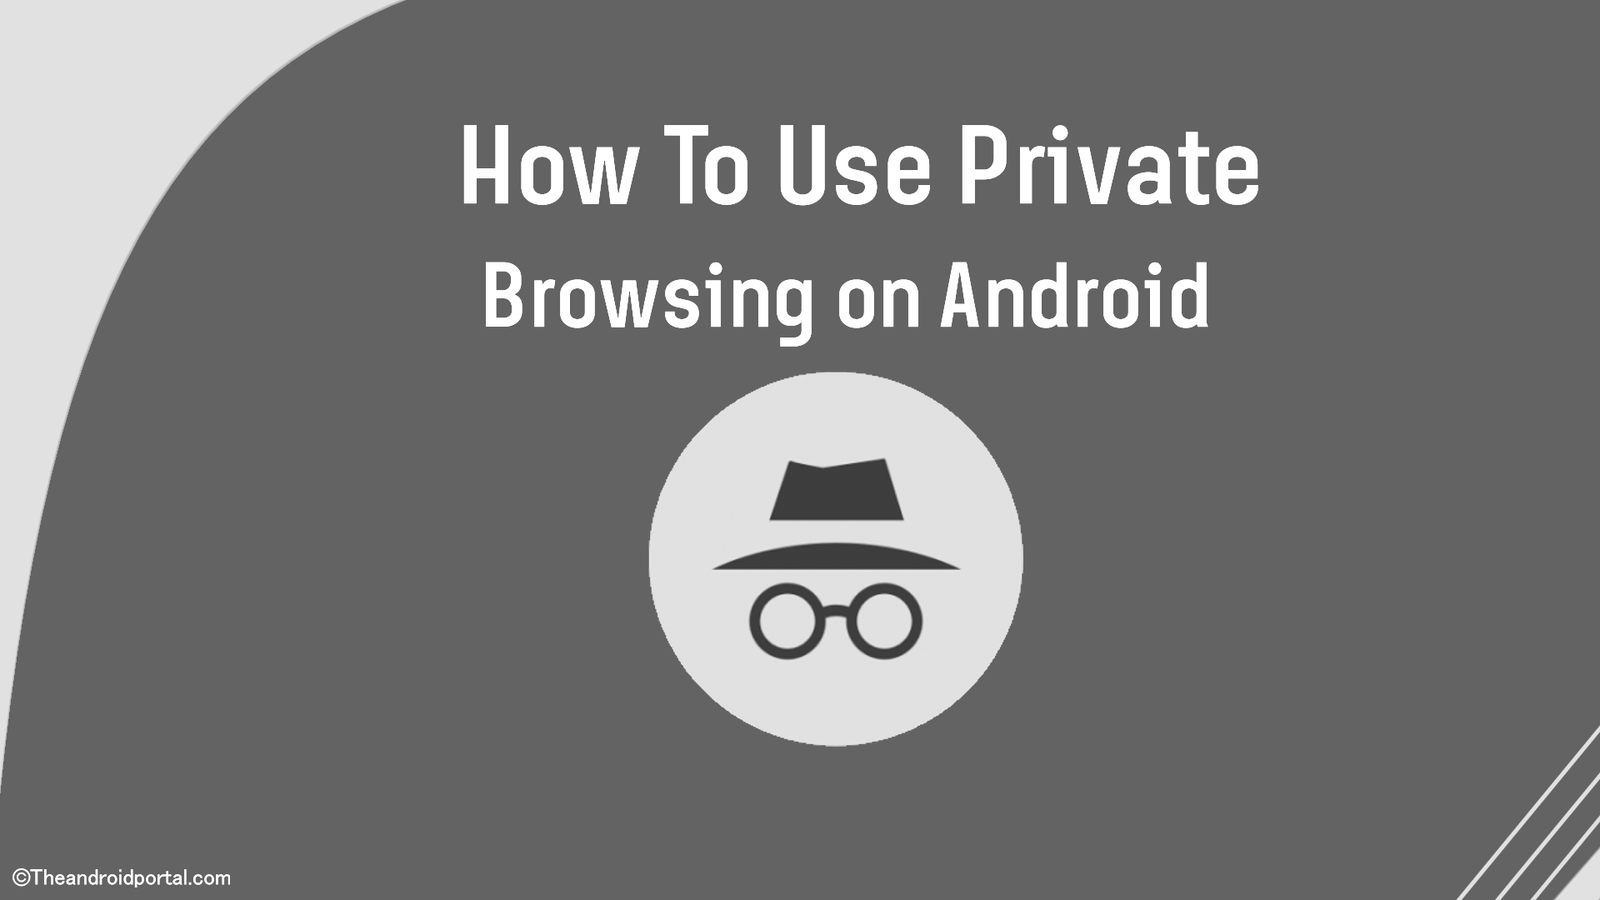 How To Use Private Browsing on Android - theandroidportal.com